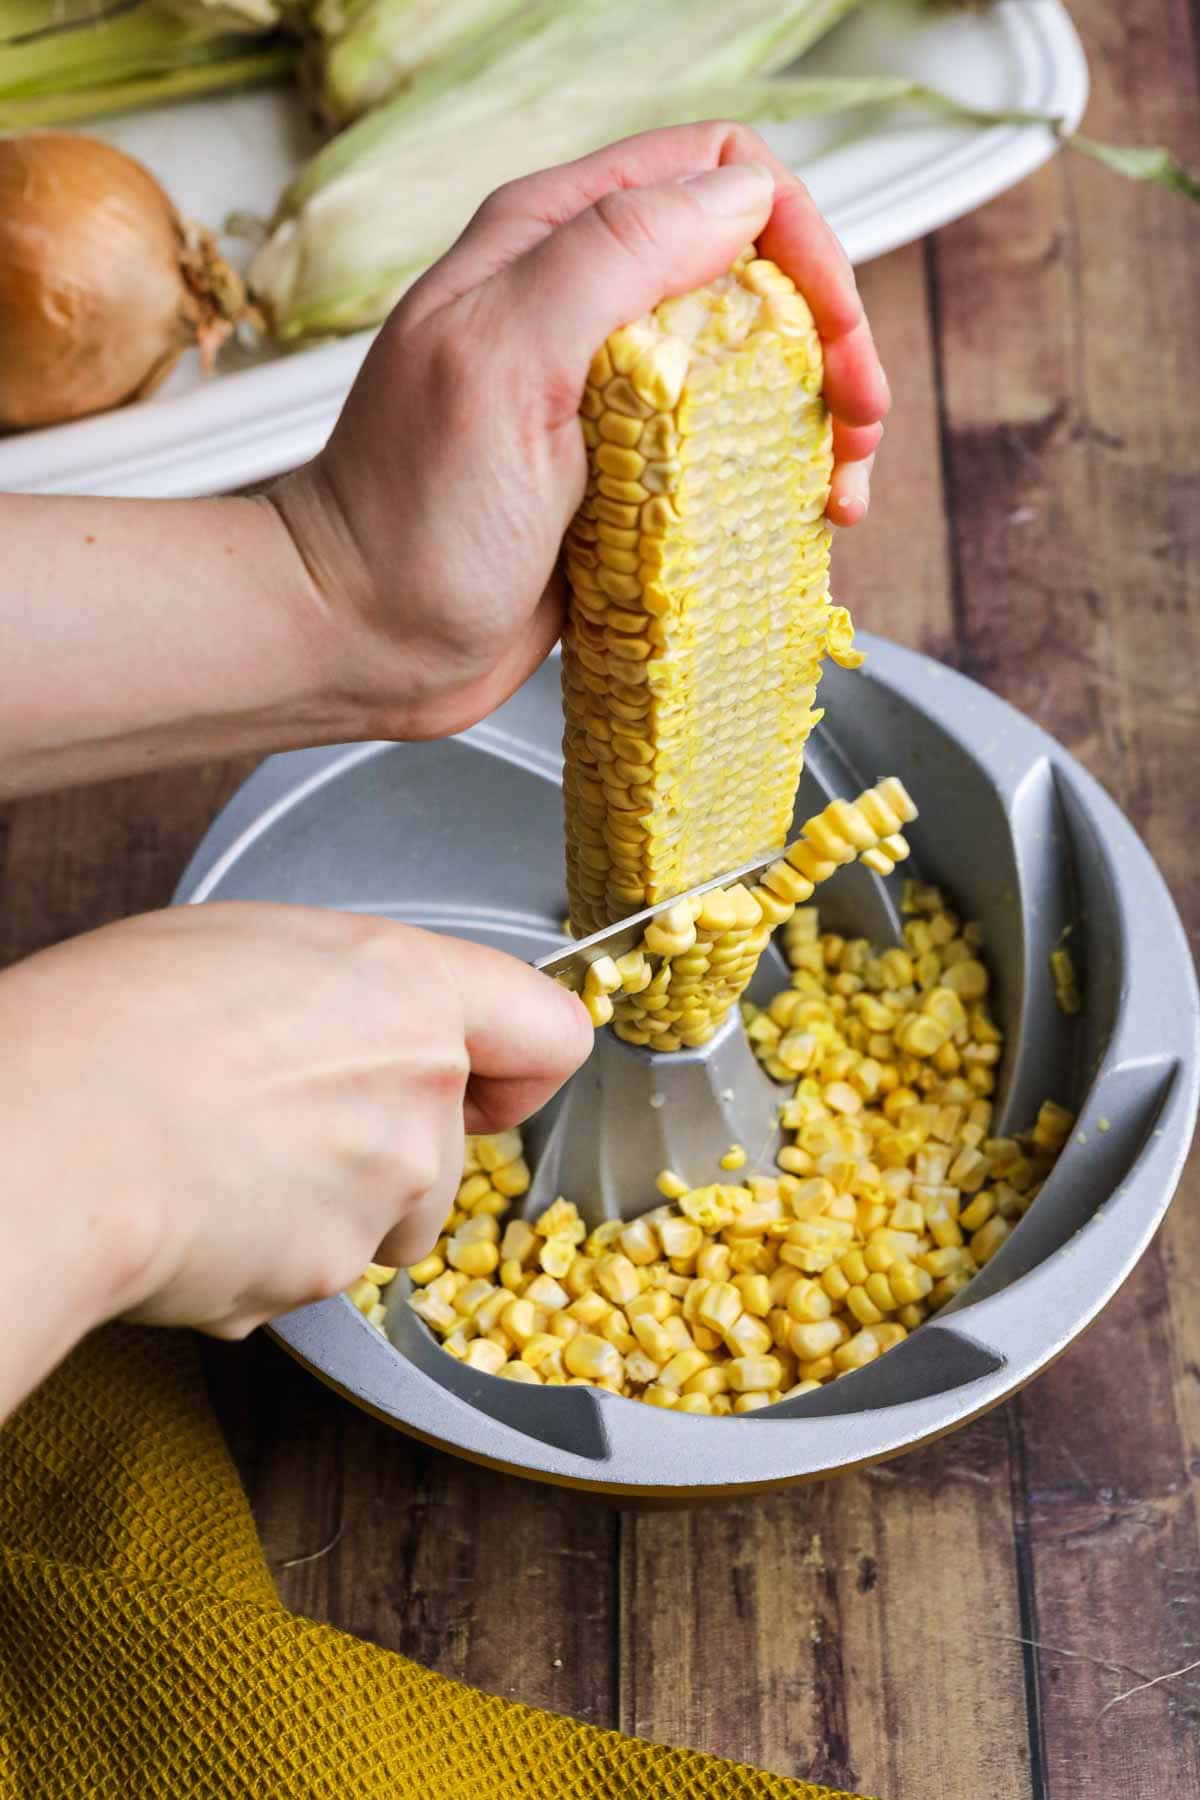 Creamed Corn removing kernels from cob